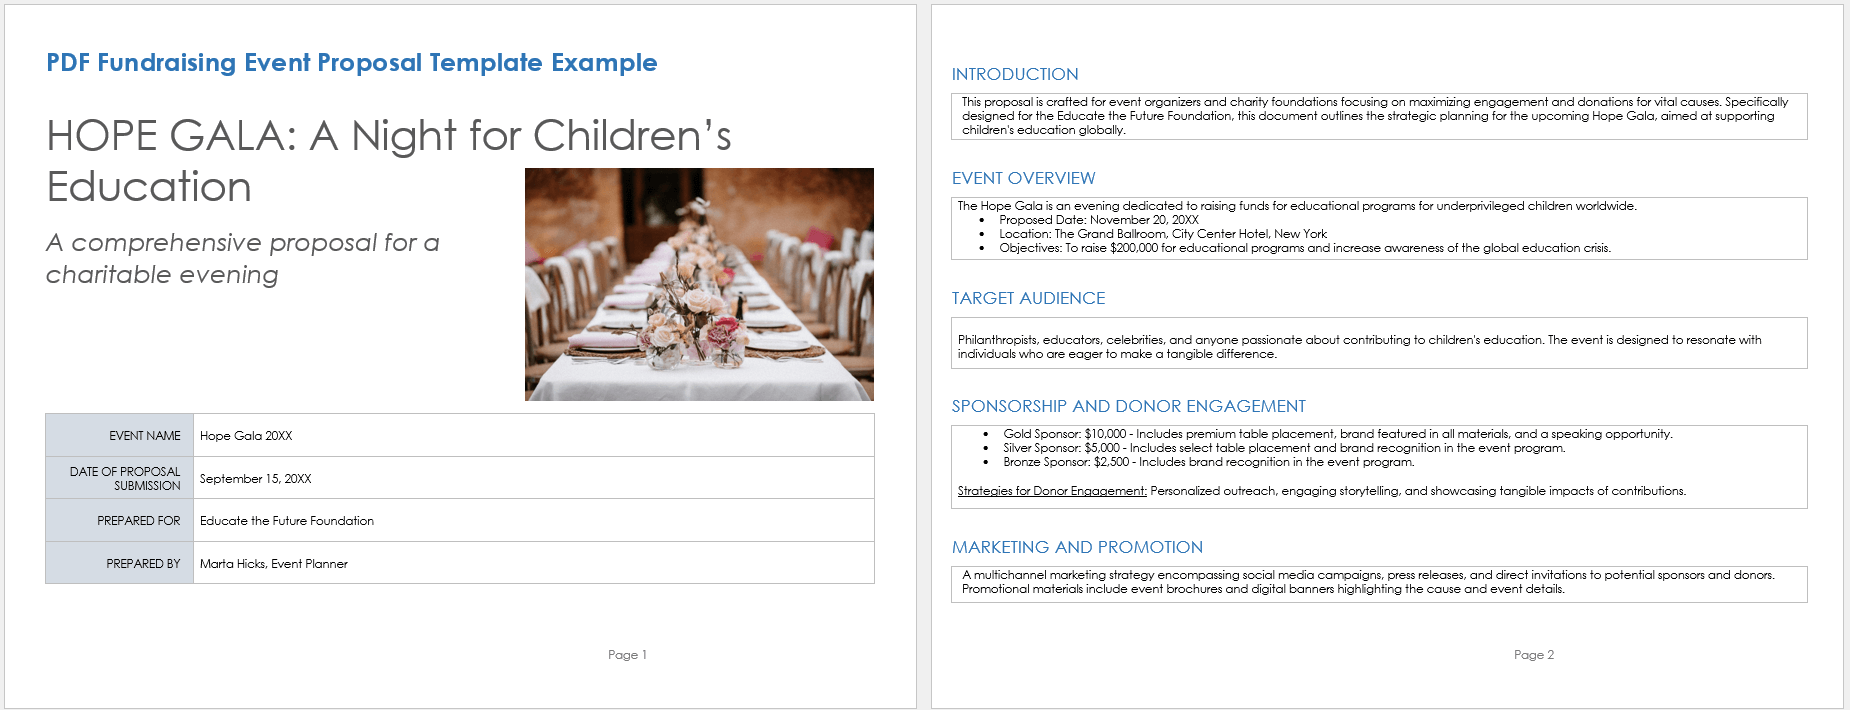 PDF Fundraising Event Proposal Example Template